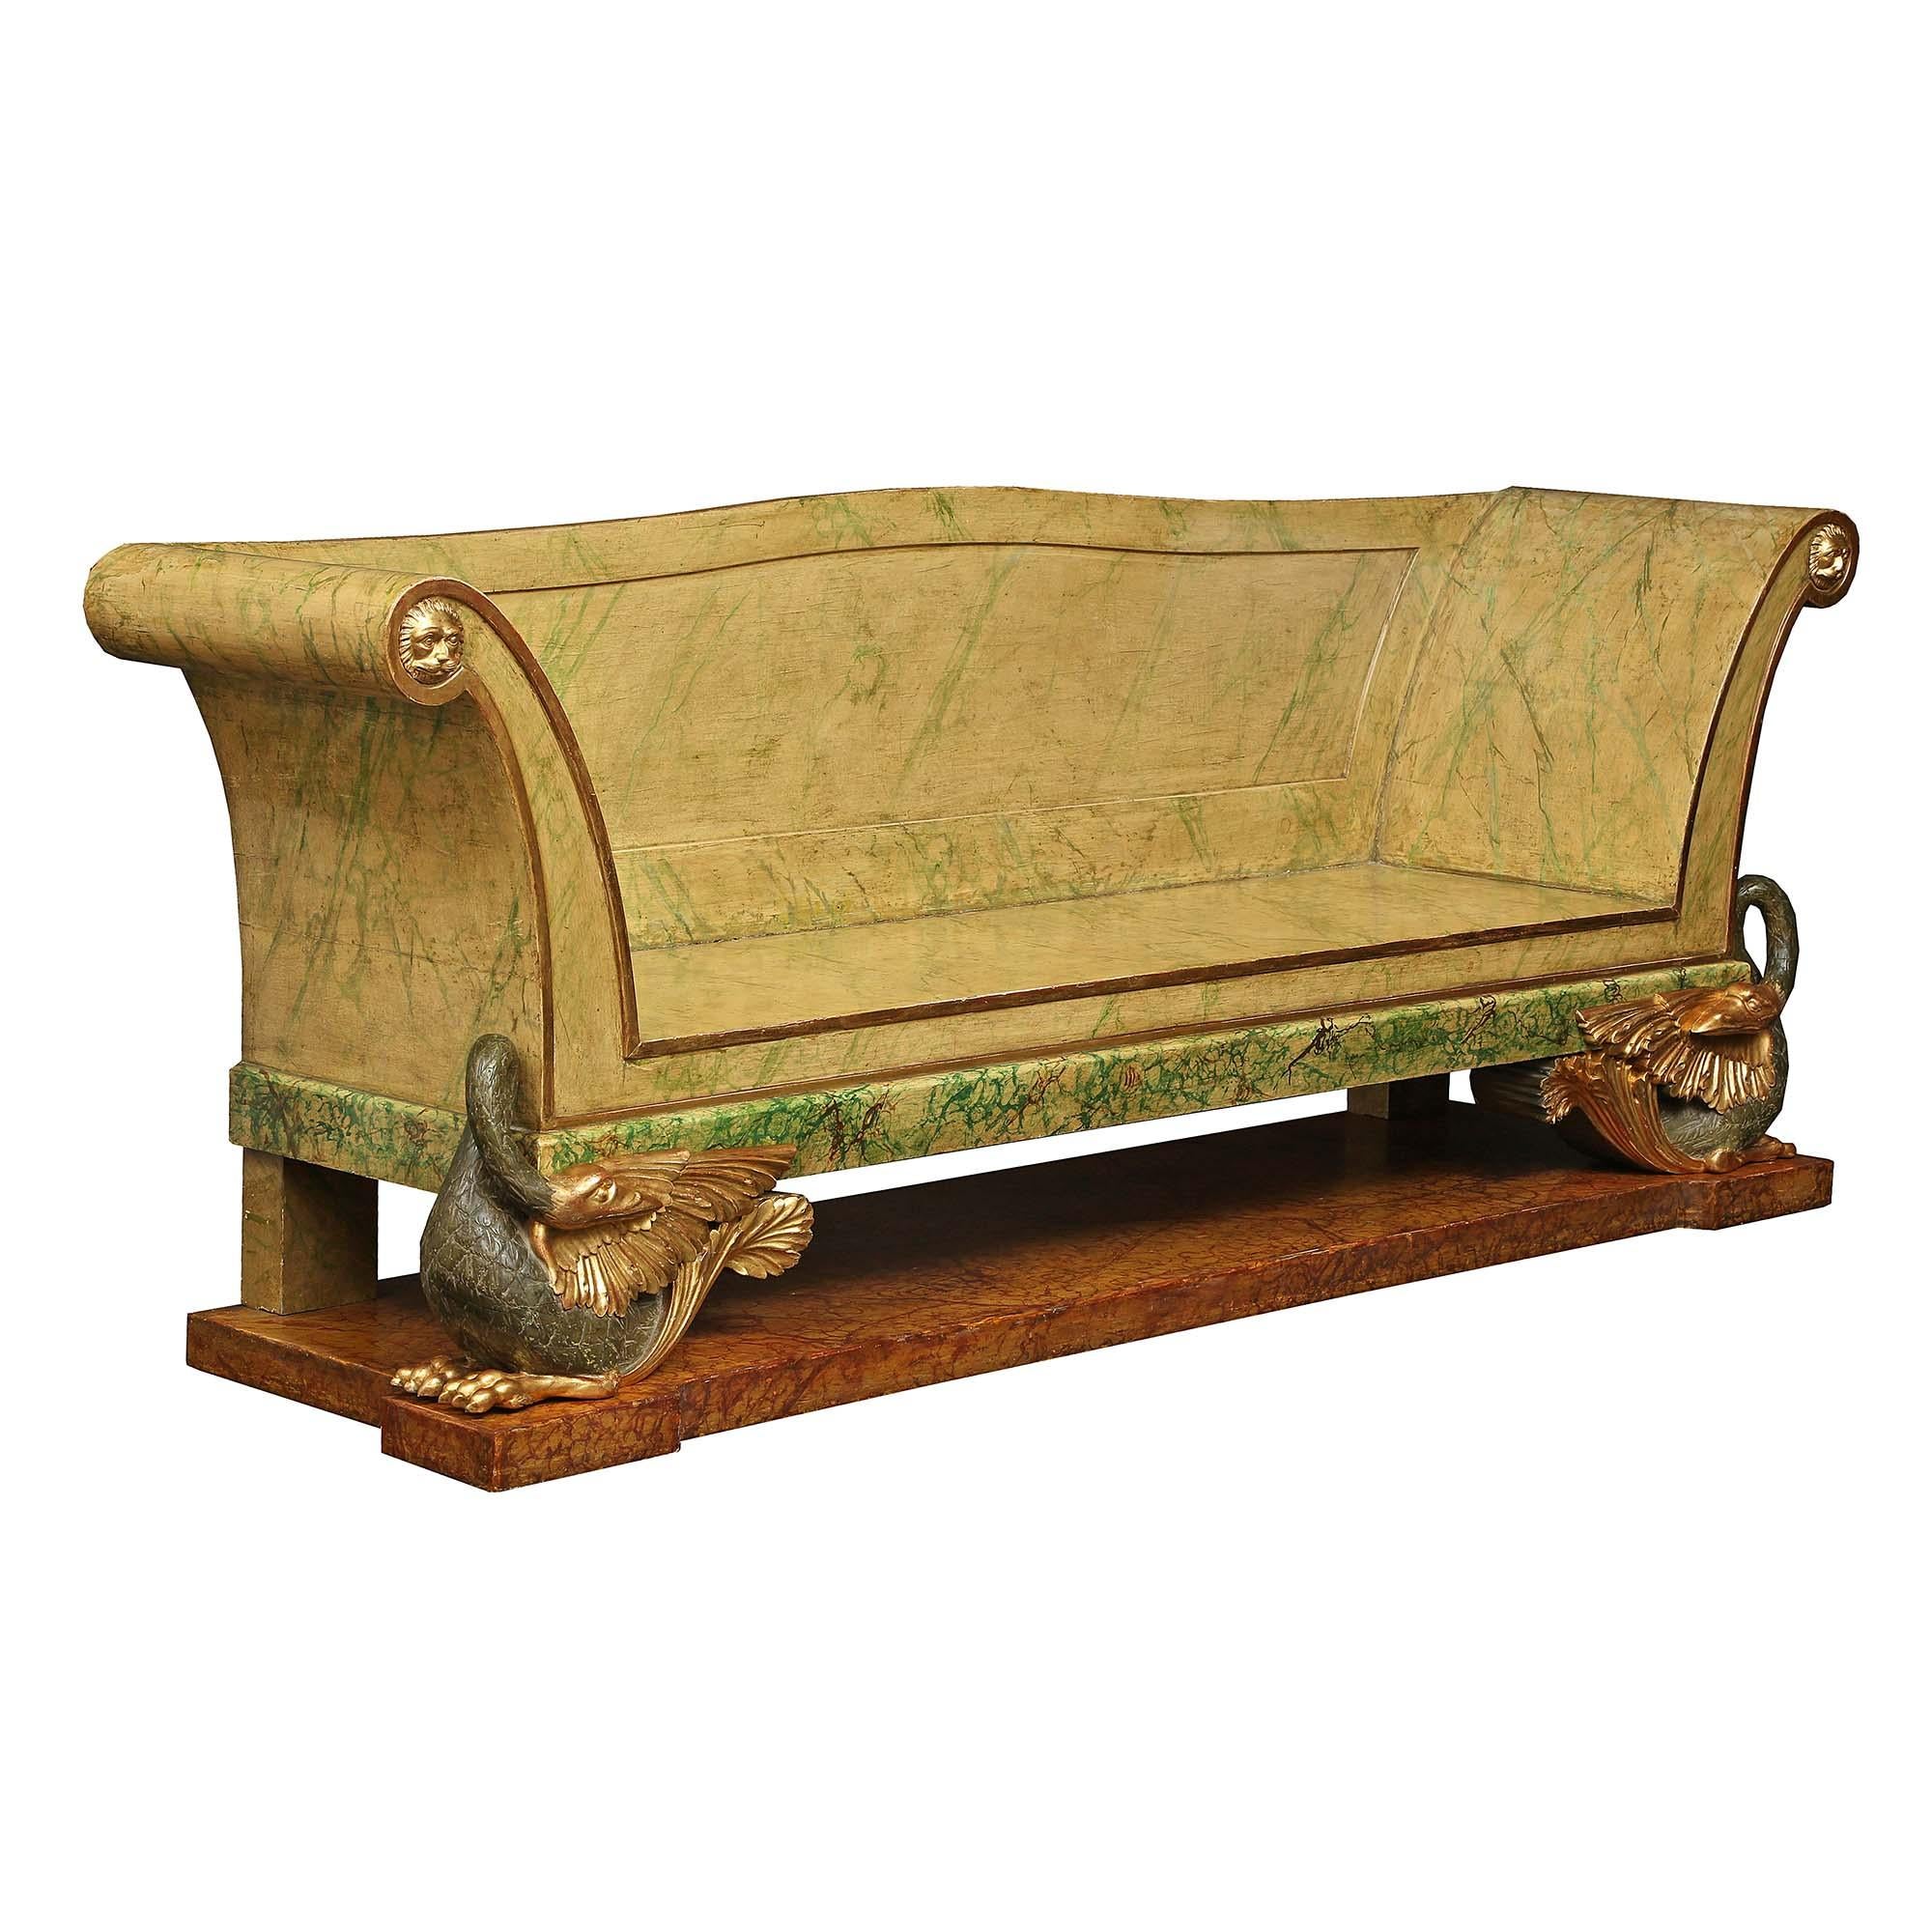 Neoclassical Italian Early 19th Century Neo-Classical St. Settee For Sale